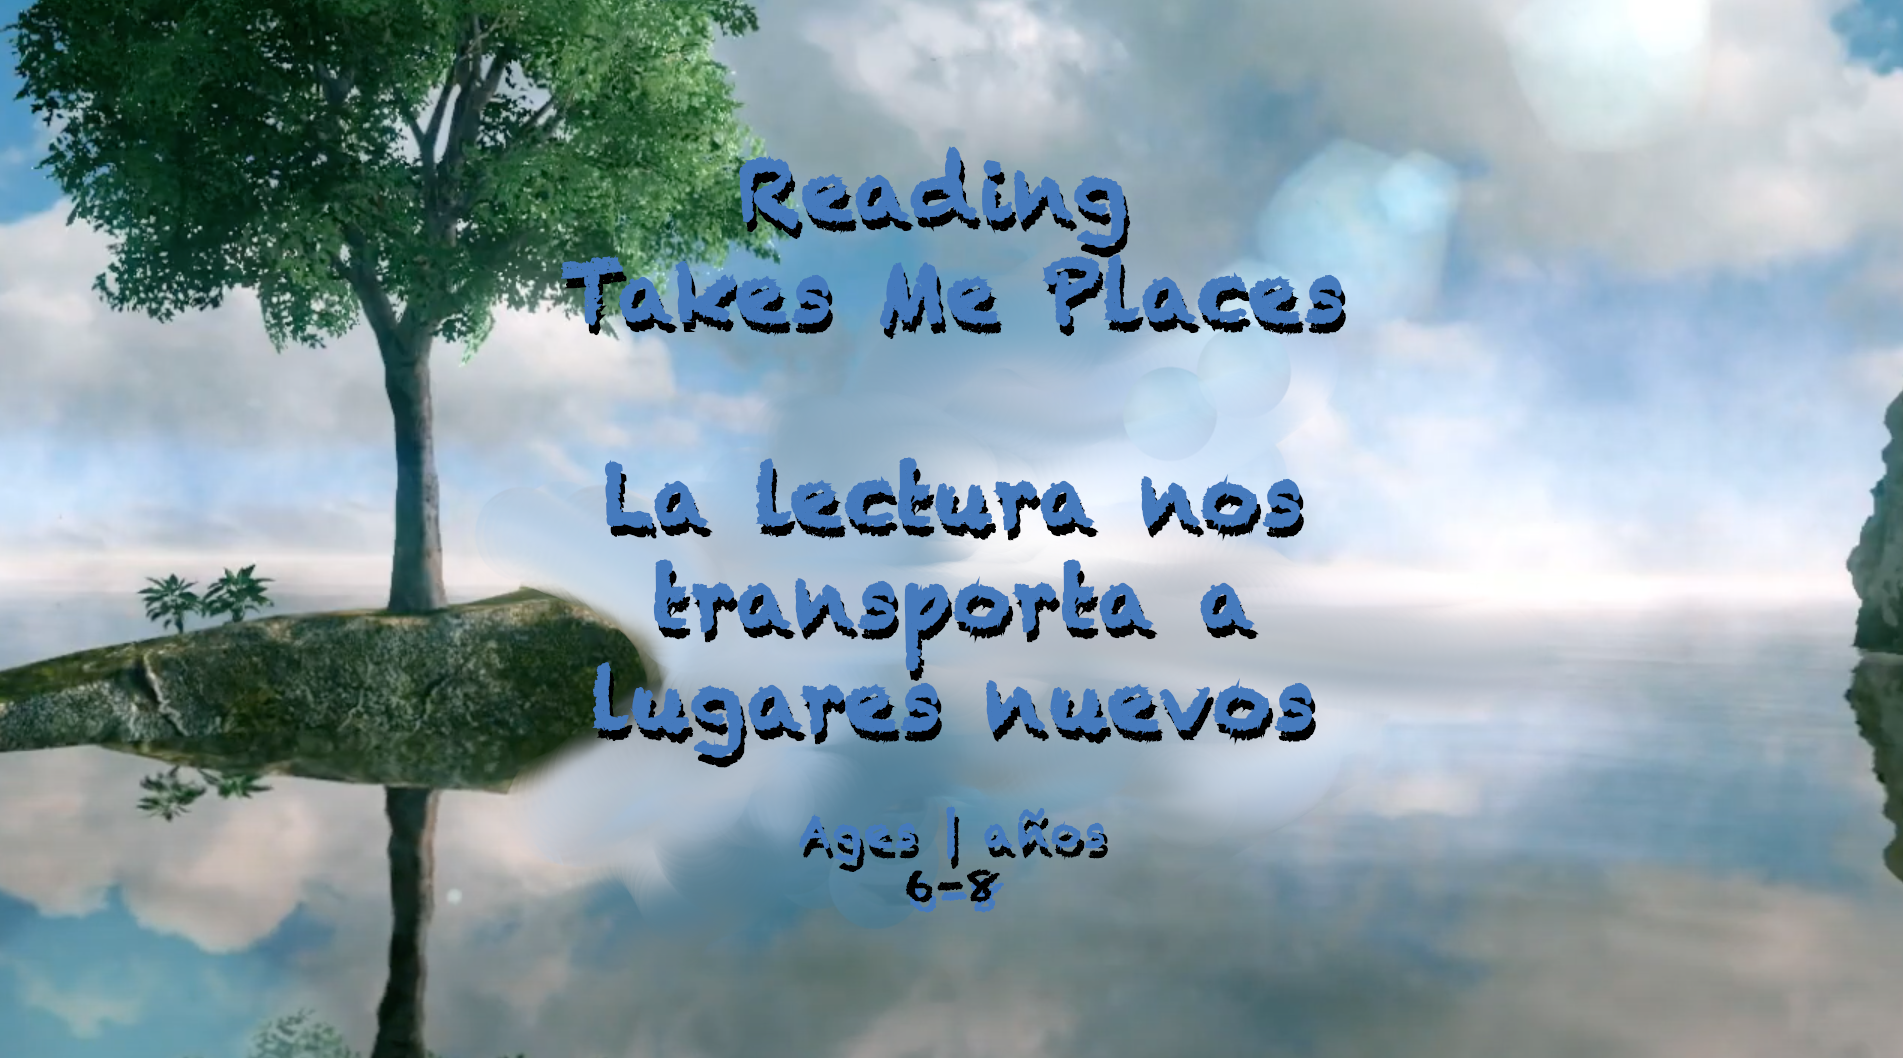 Reading Takes Me Places for 6-8 year olds